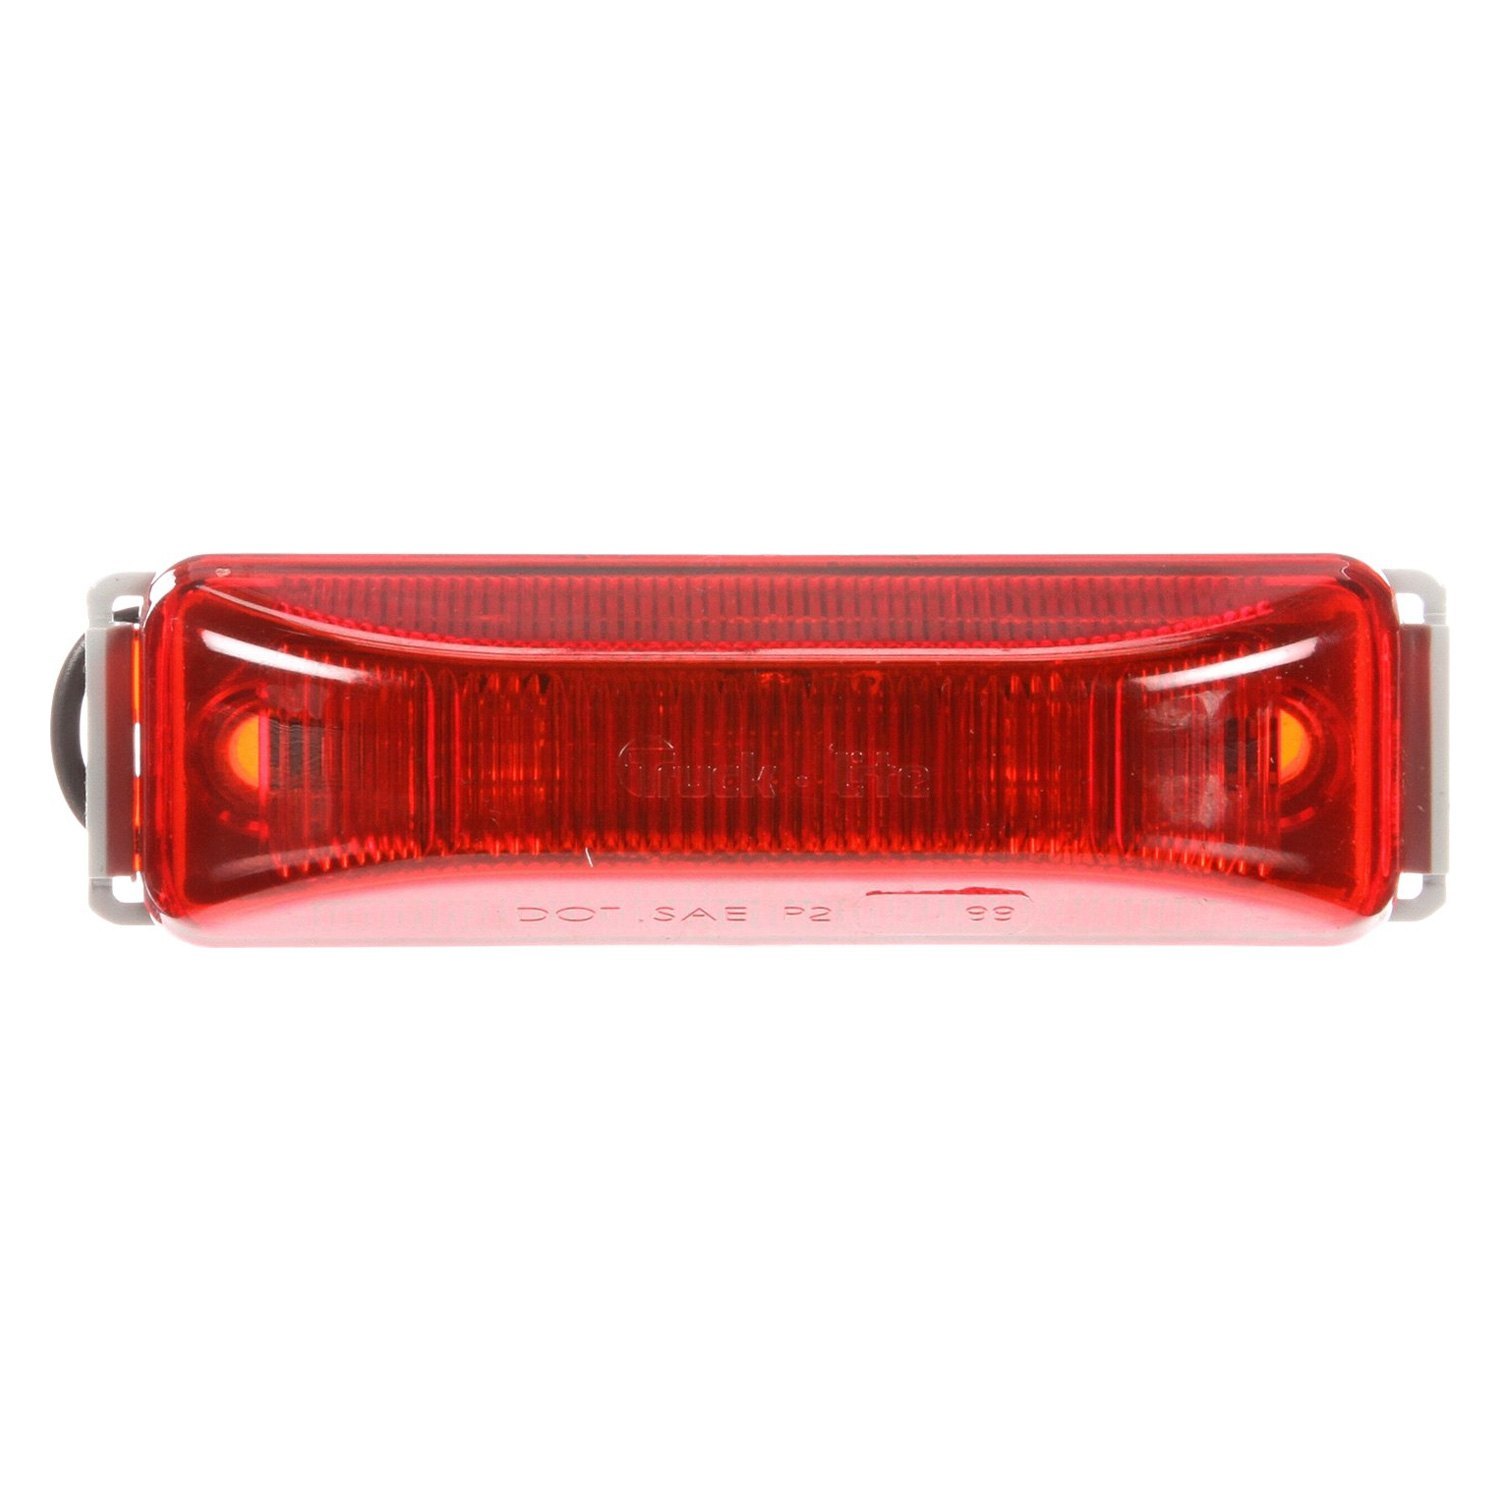 Chow Kit Red Light / Get The Best Home Red Light Therapy Kit For